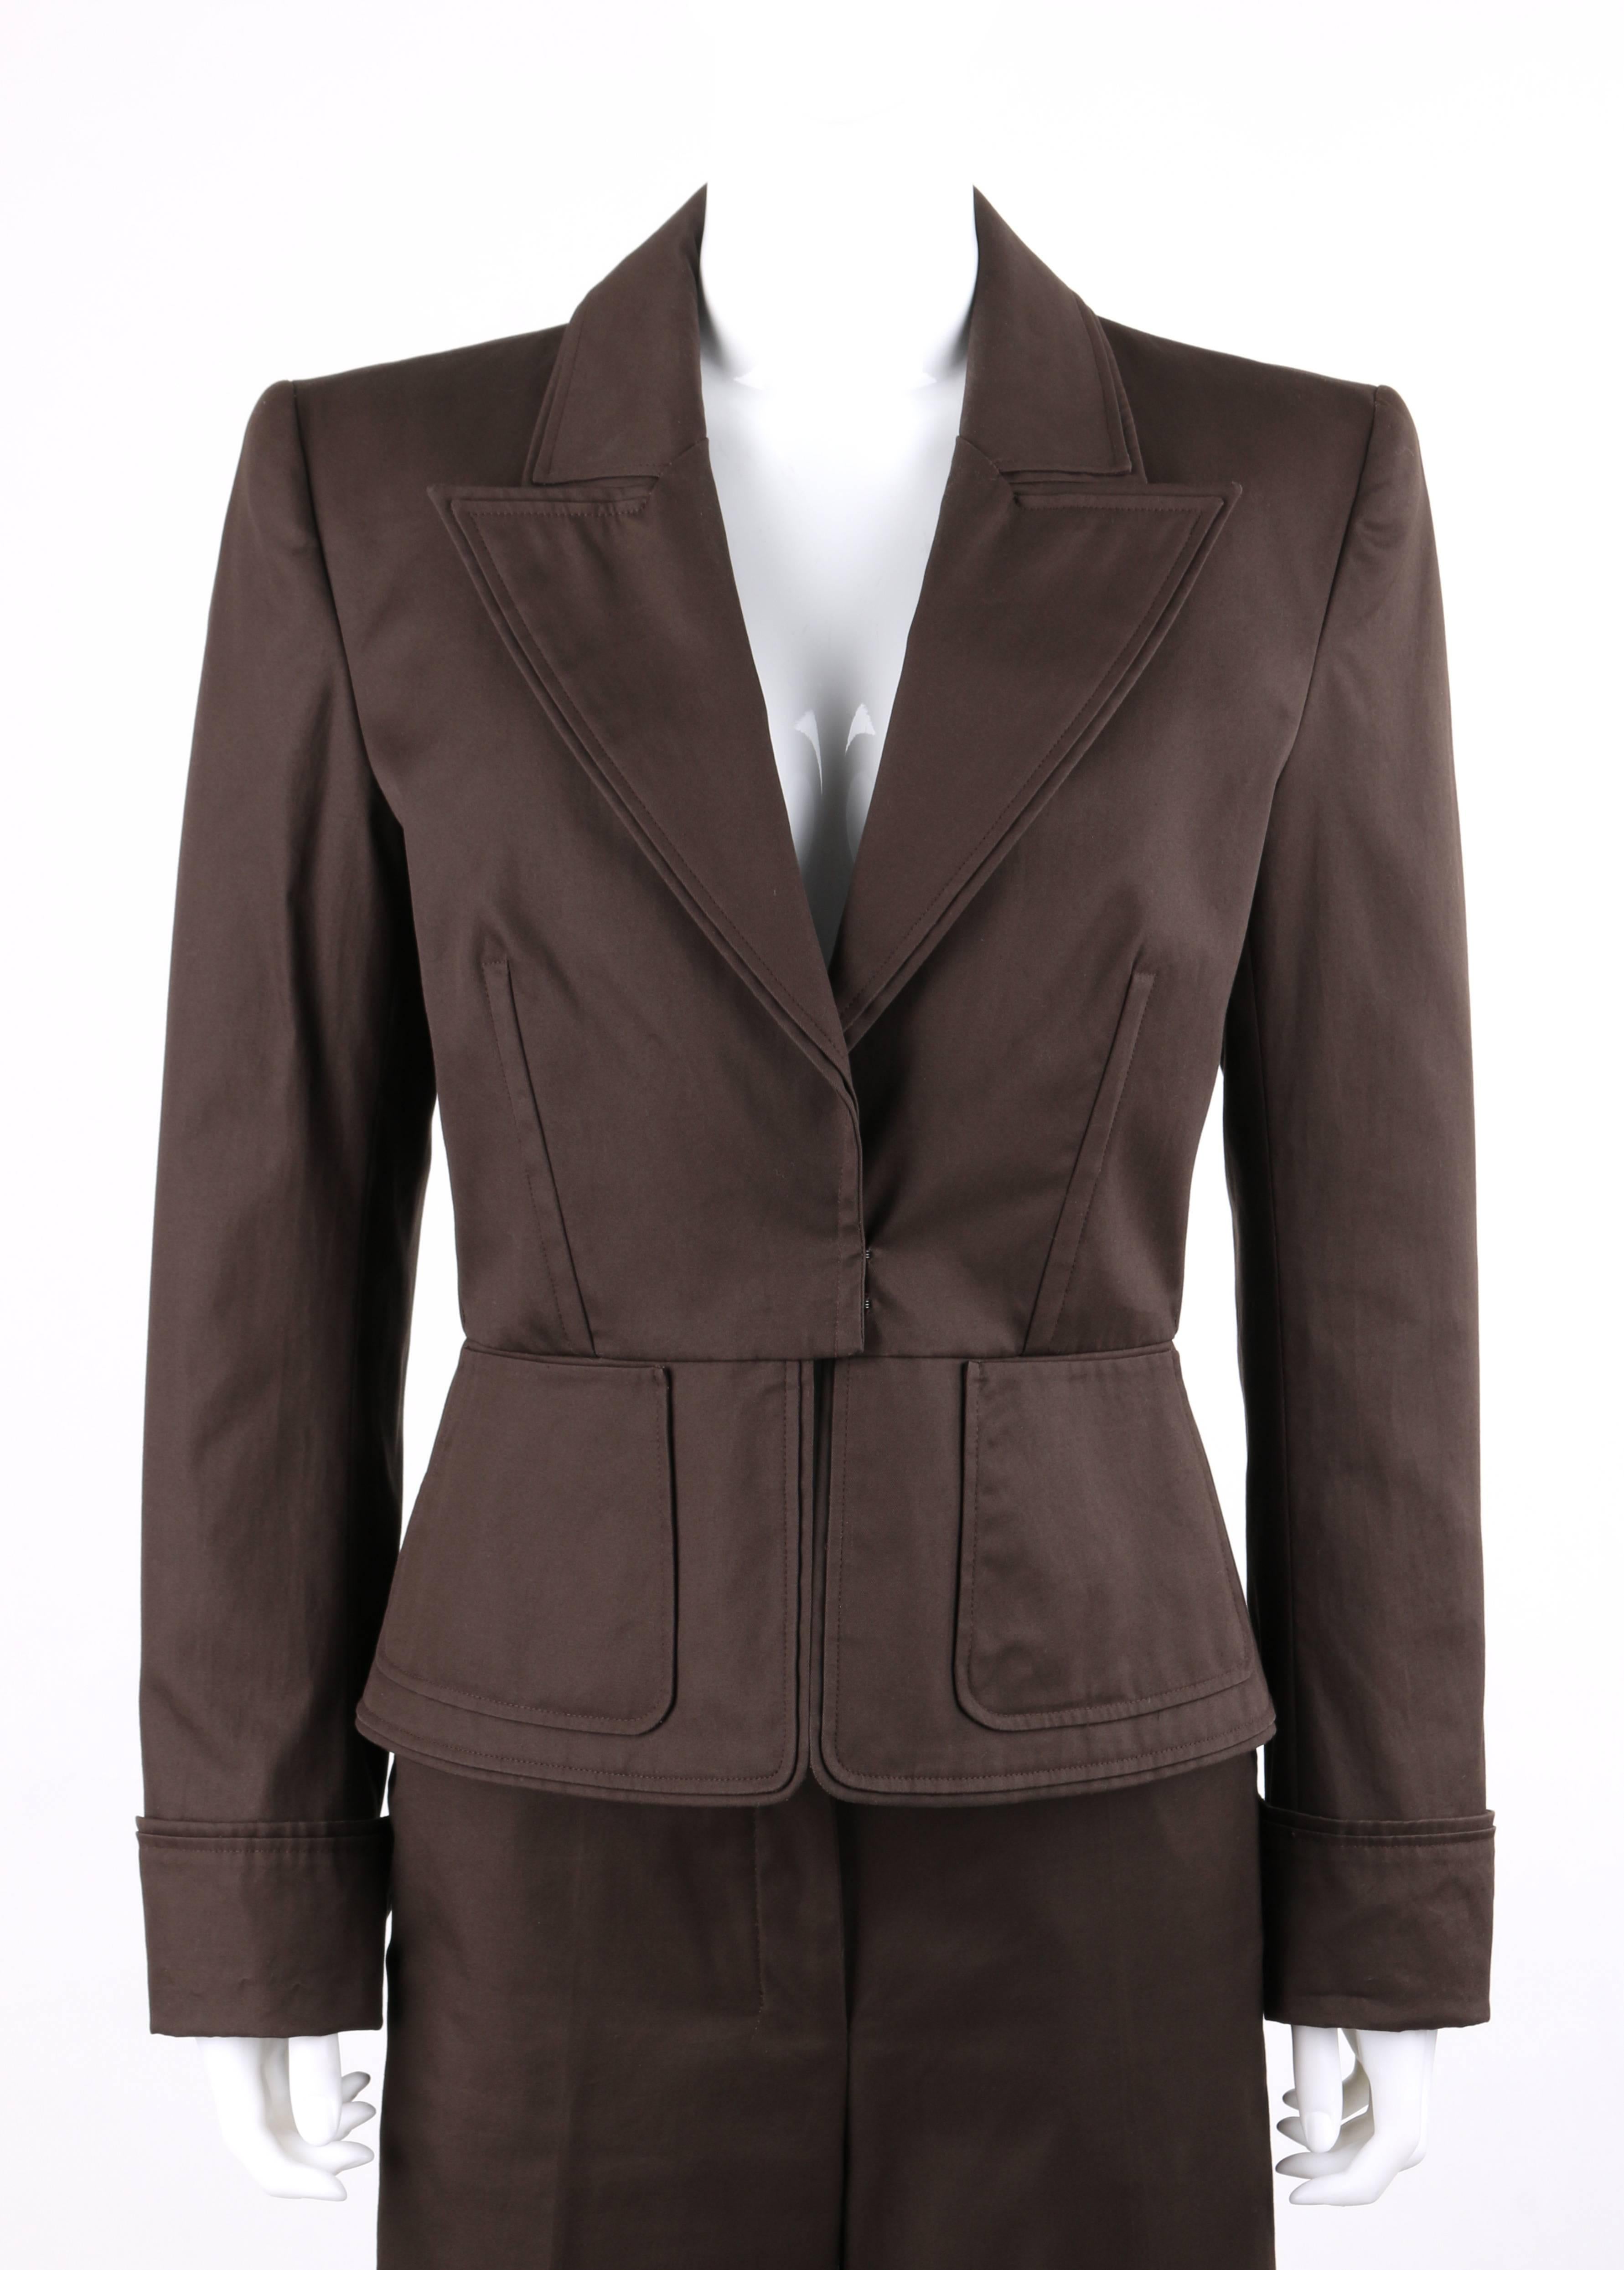 Yves Saint Laurent Spring/Summer 2003 YSL two piece brown (with a hint of olive) peplum blazer pants suit set. Designed by Tom Ford. Wide peak double layered lapel collar. Long sleeves with slit at cuff. Four center front concealed hook and eye